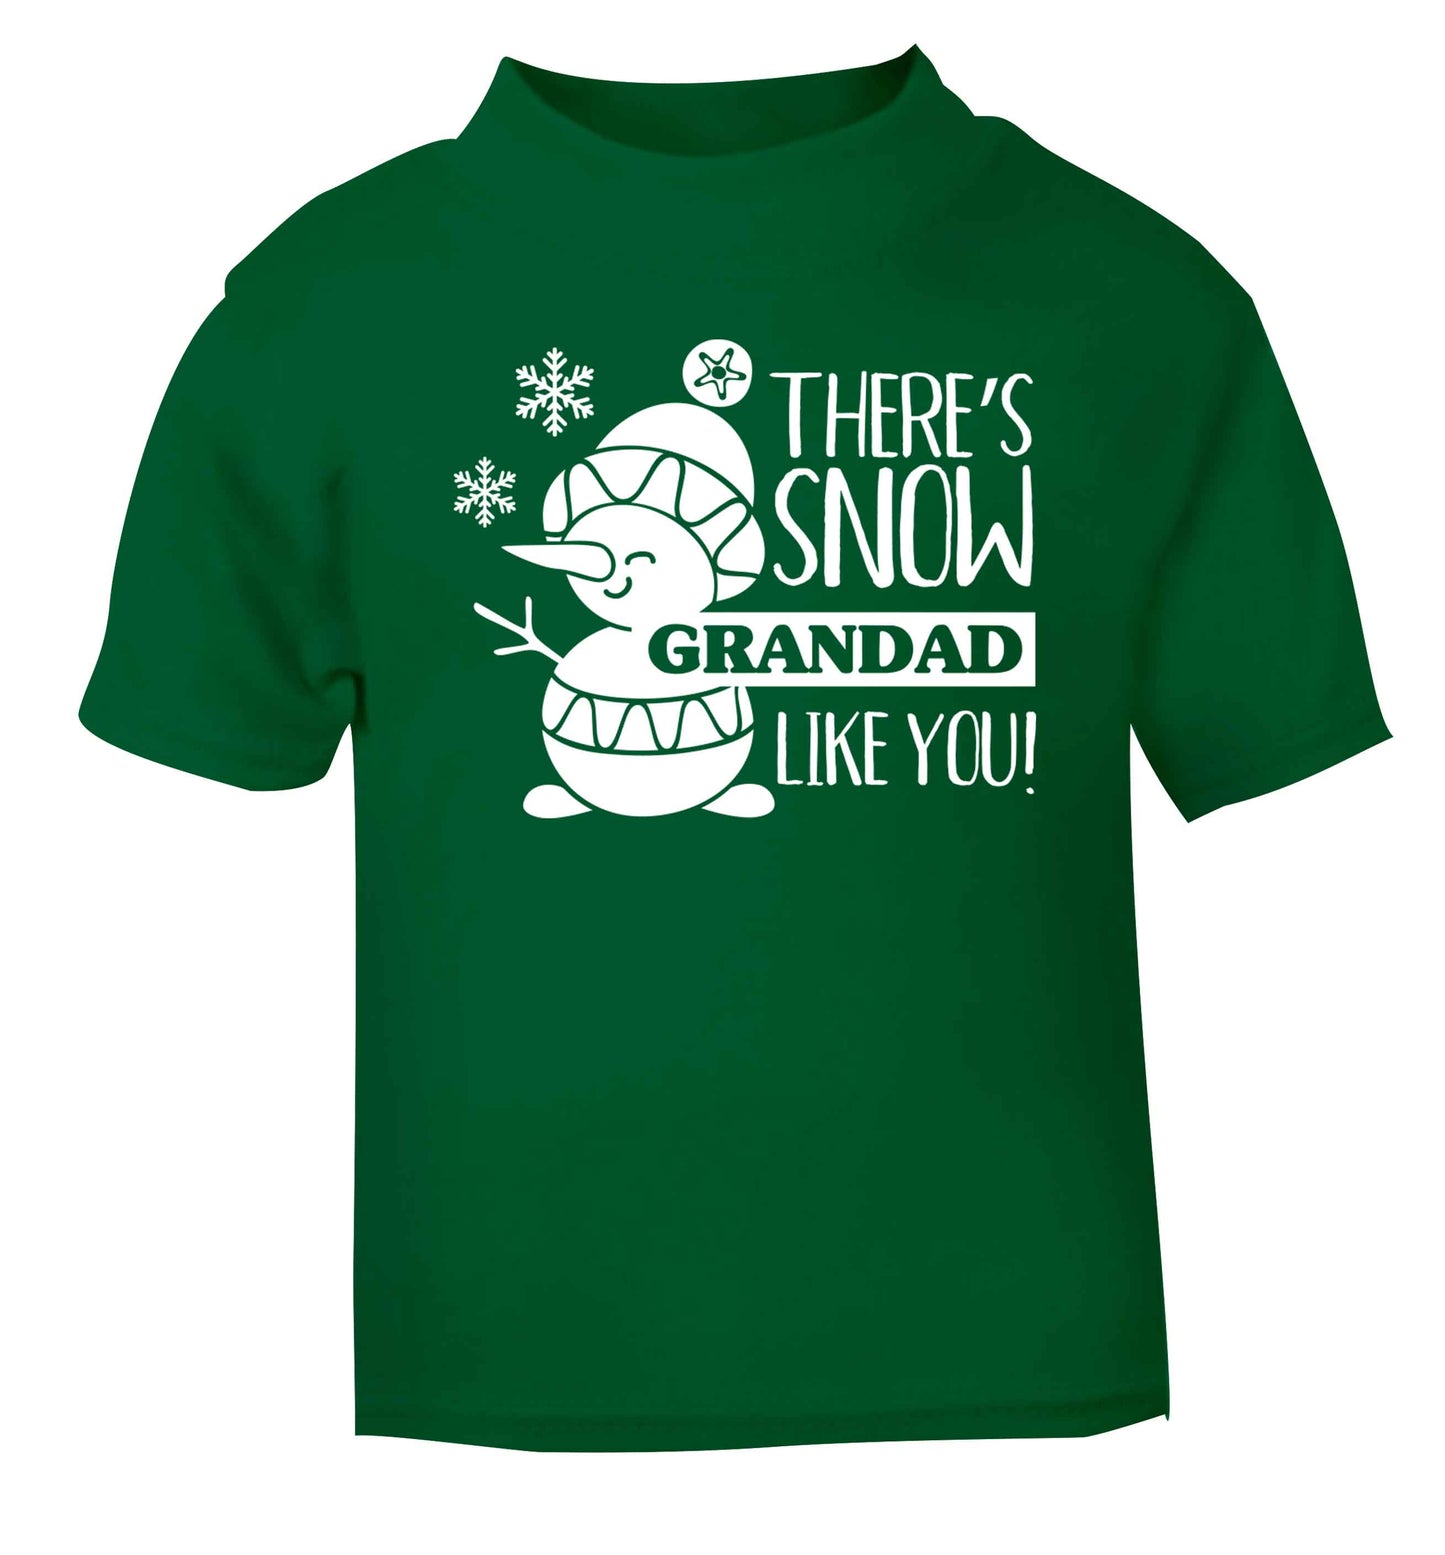 There's snow grandad like you green baby toddler Tshirt 2 Years